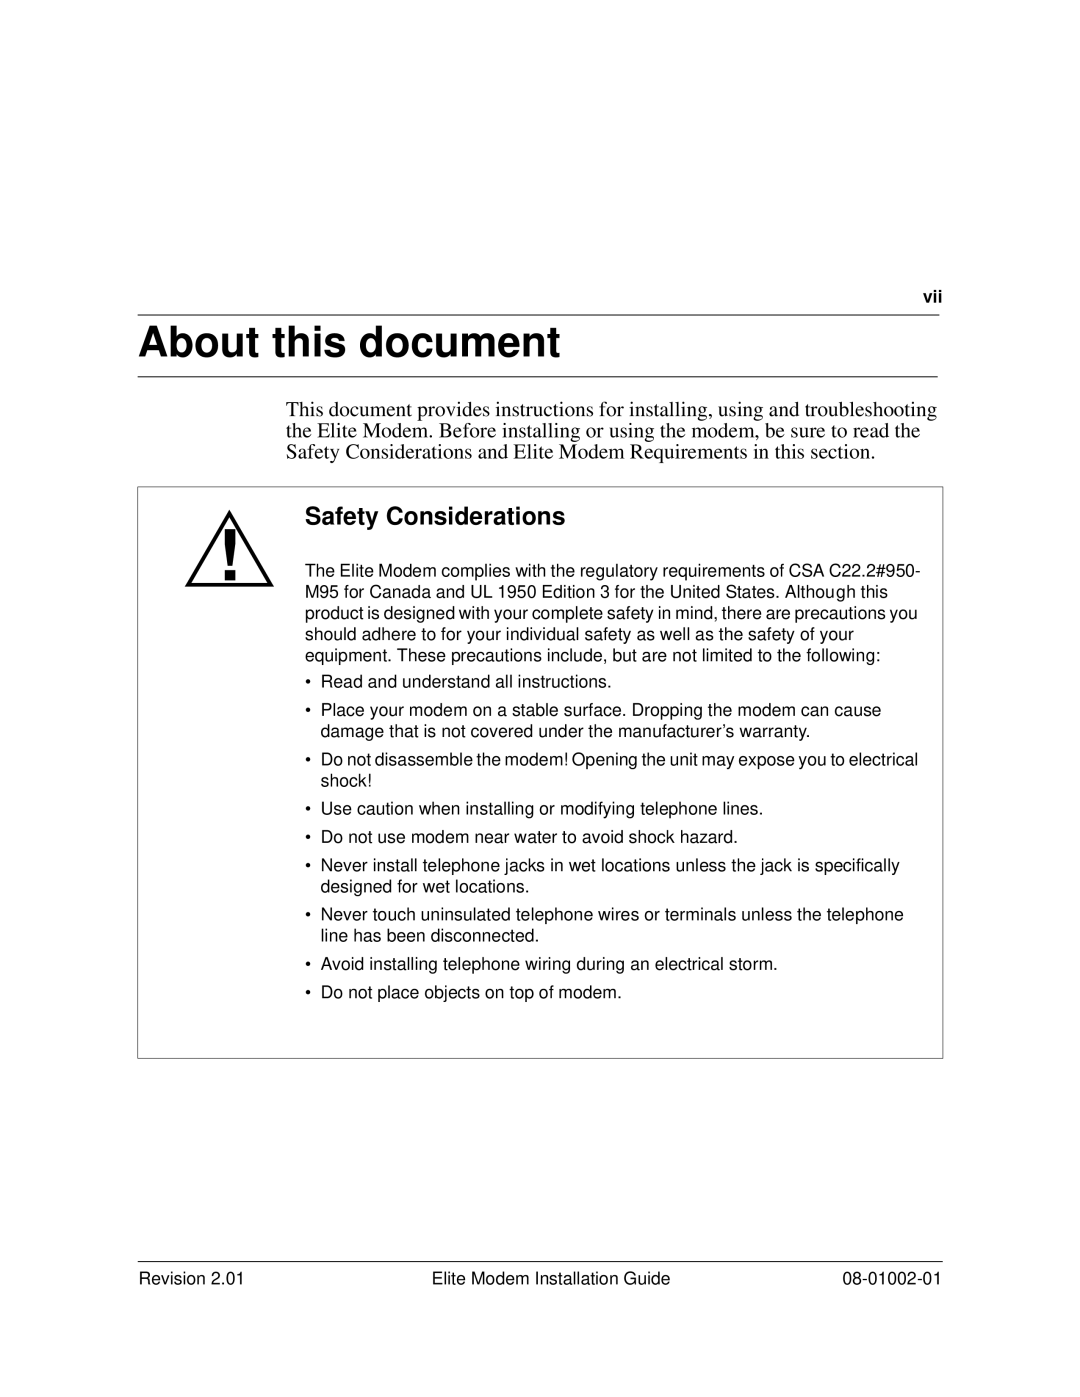 Zhone Technologies 08-01002-01 manual About this document, Safety Considerations 